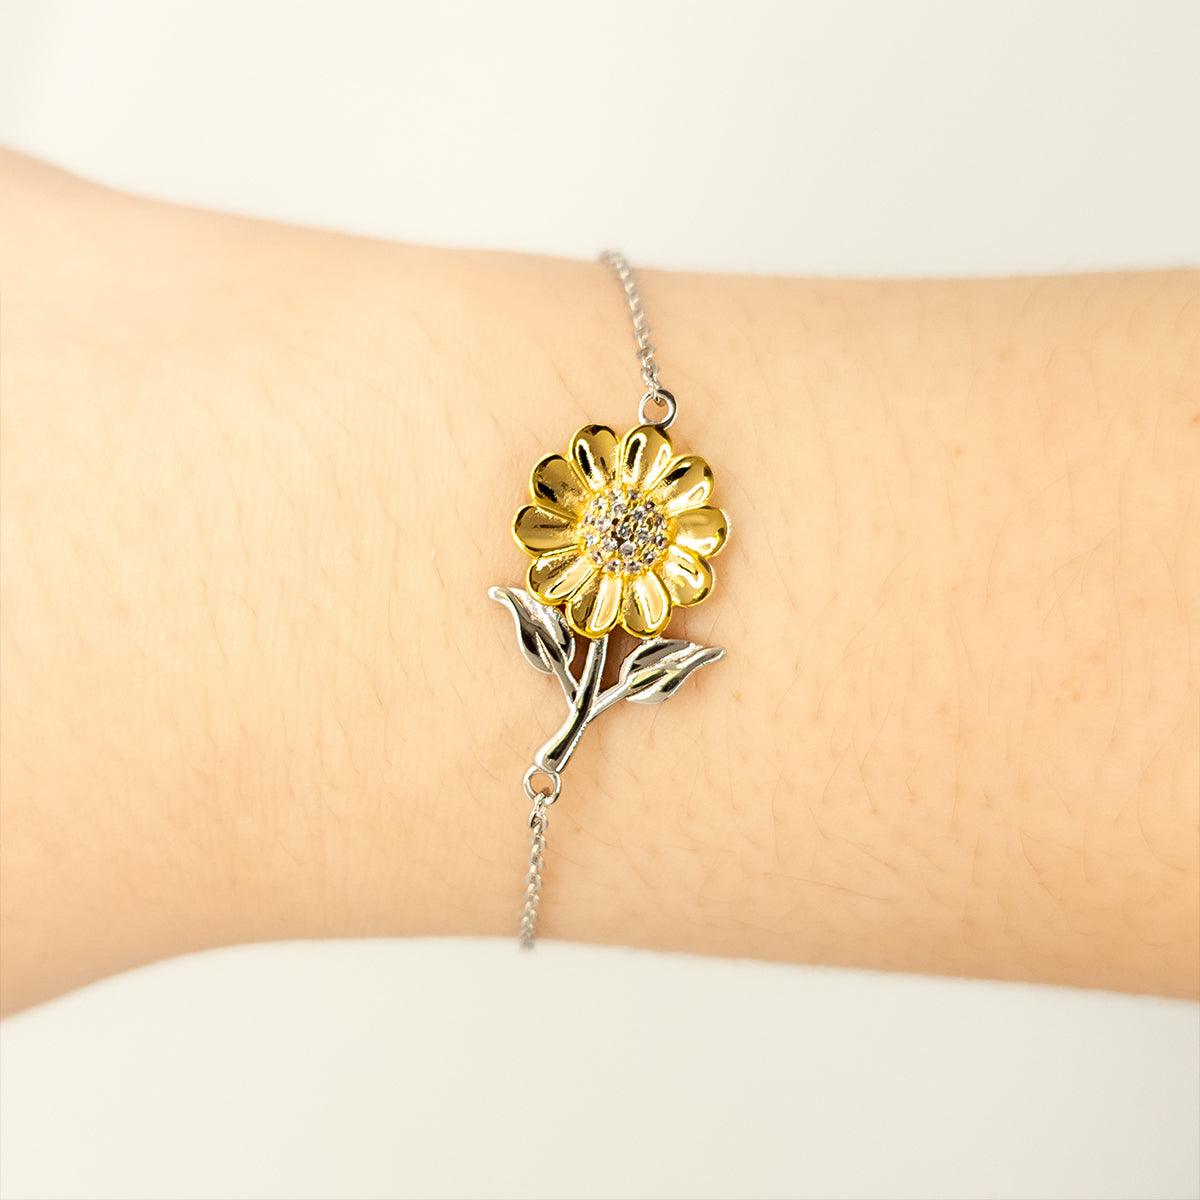 Postal Worker Sunflower Bracelet - Thanks for being who you are - Birthday Christmas Jewelry Gifts Coworkers Colleague Boss - Mallard Moon Gift Shop